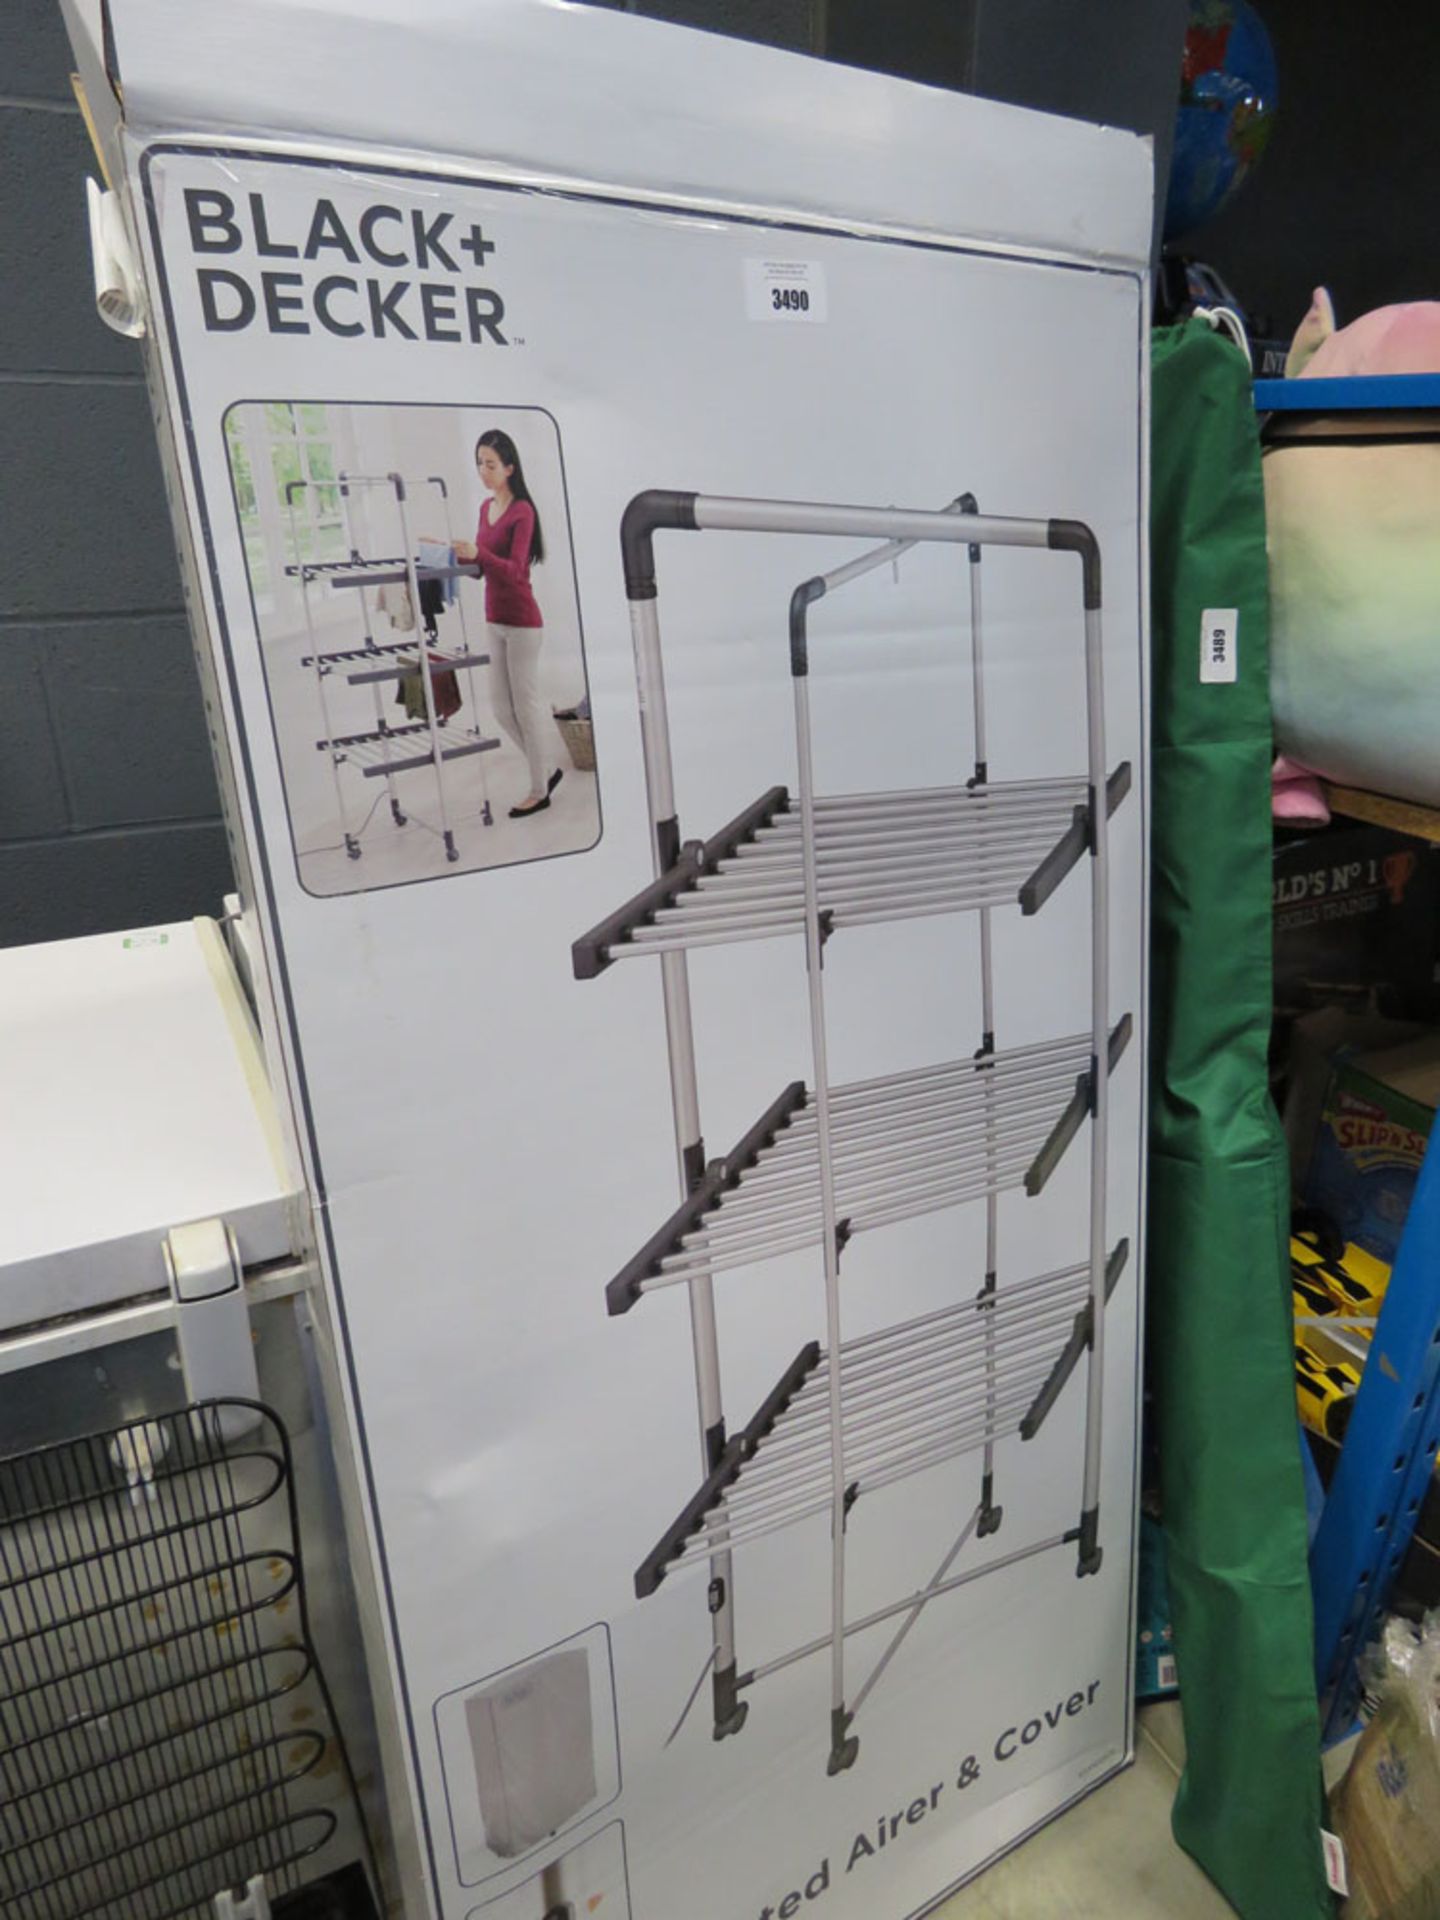 Black and Decker 3 tier heated airer in box